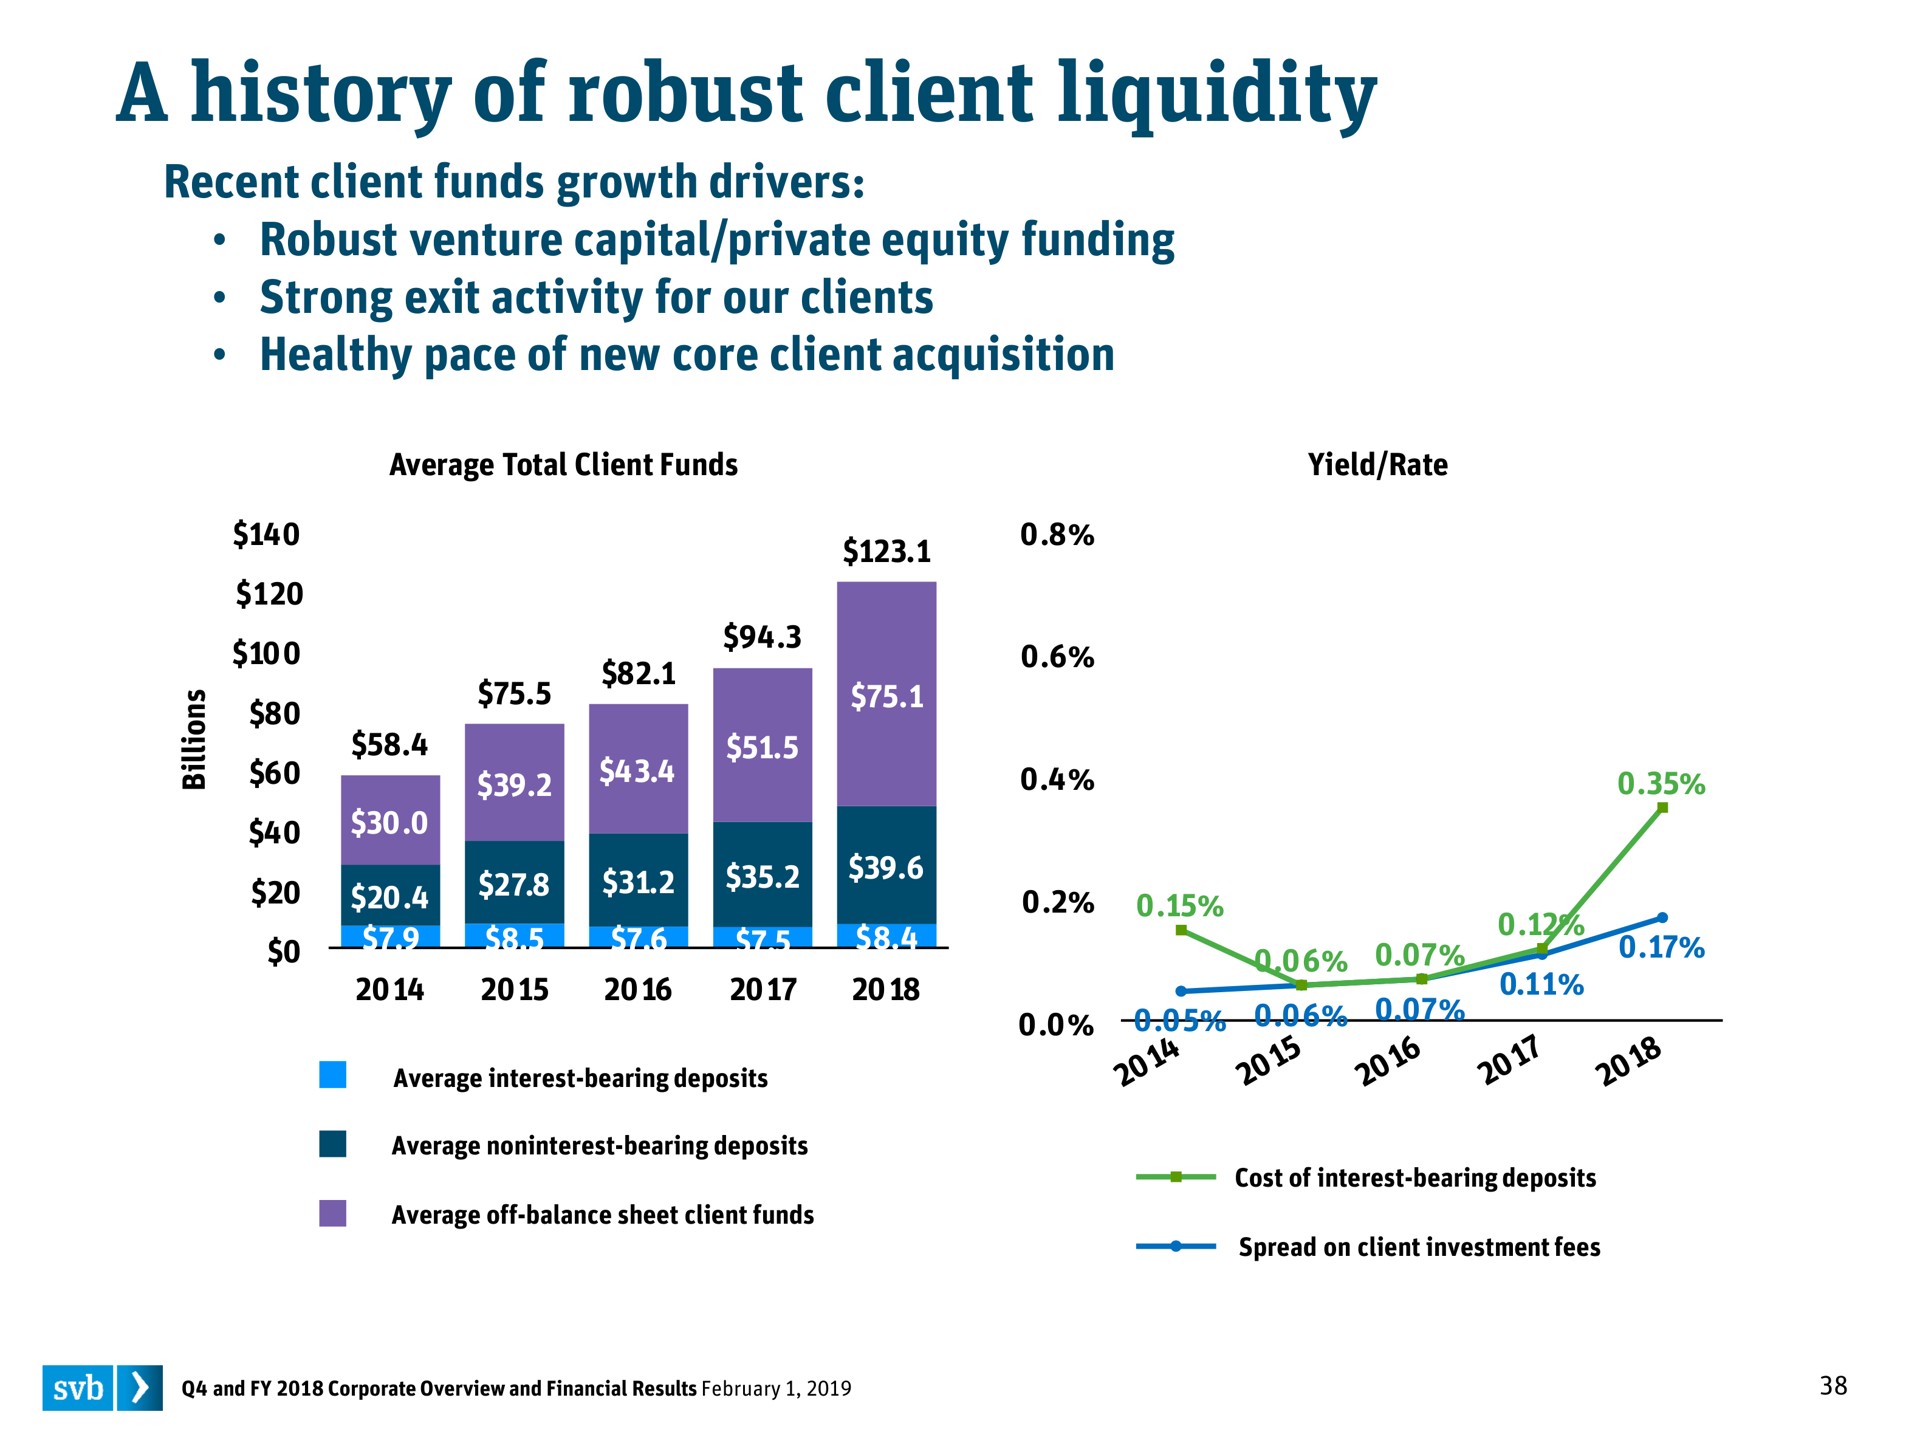 a history of robust client liquidity | Silicon Valley Bank